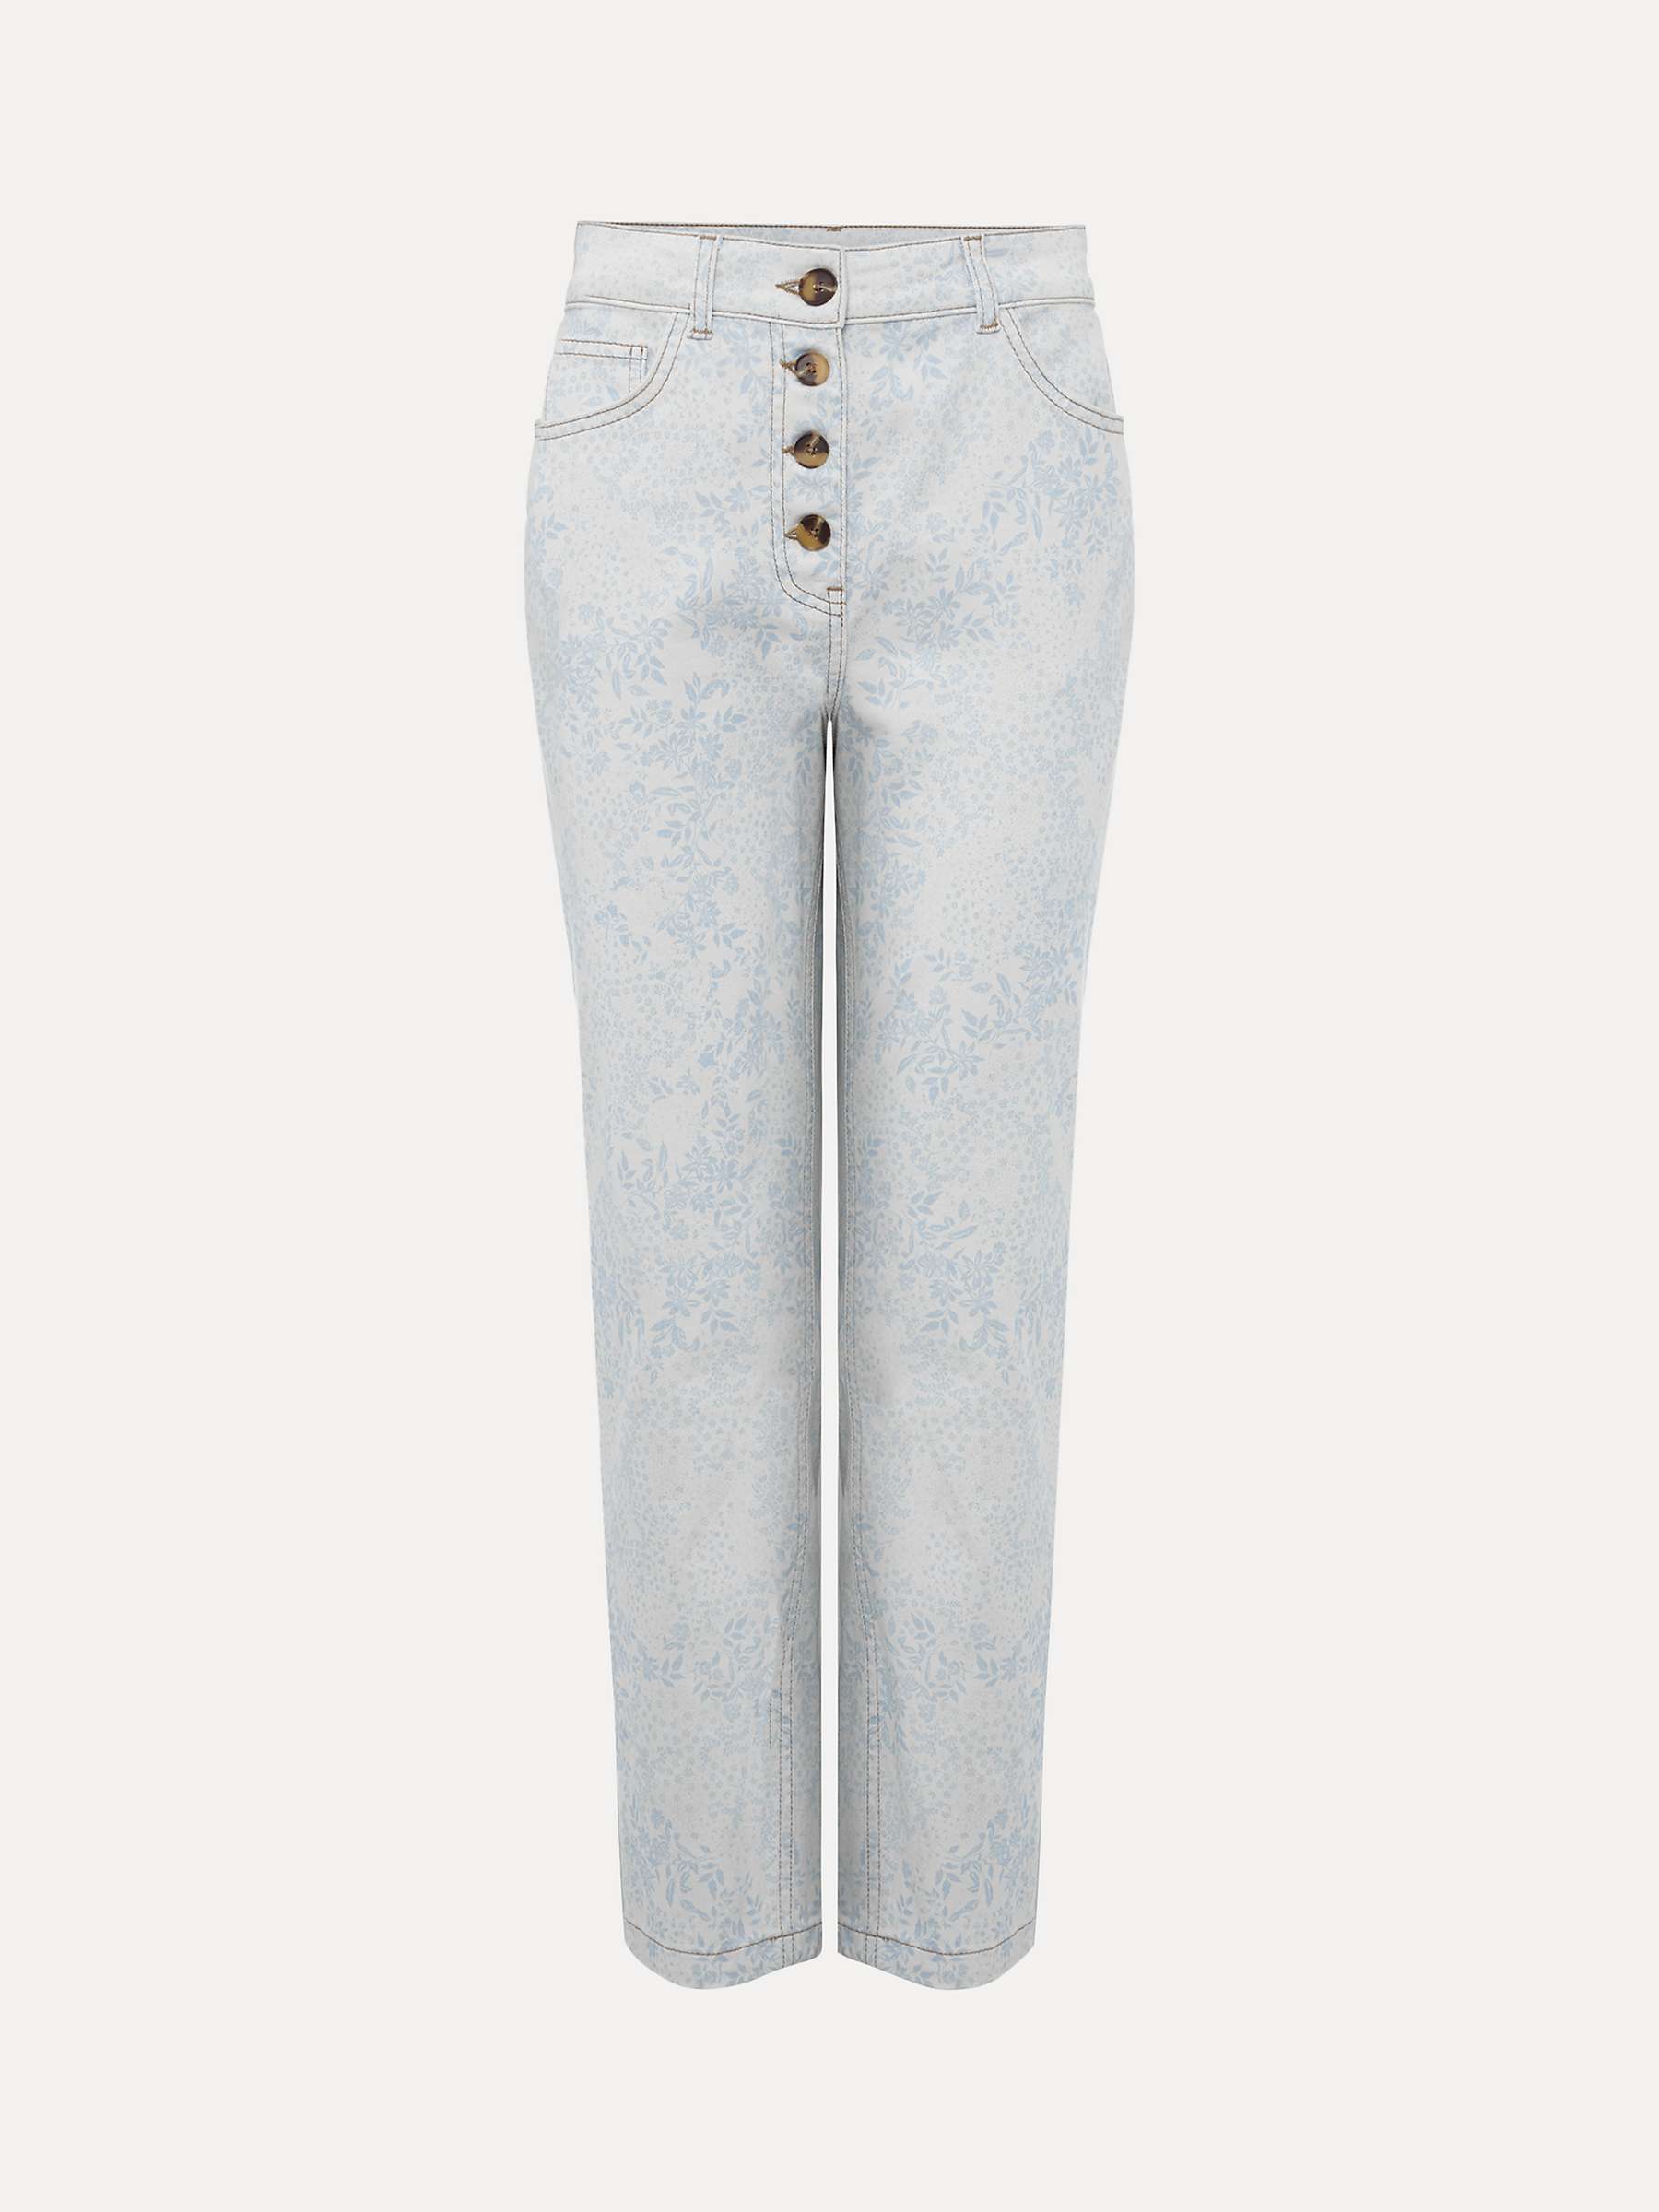 Buy Phase Eight Cordelia Floral Print Jeans, Ivory/Blue Online at johnlewis.com